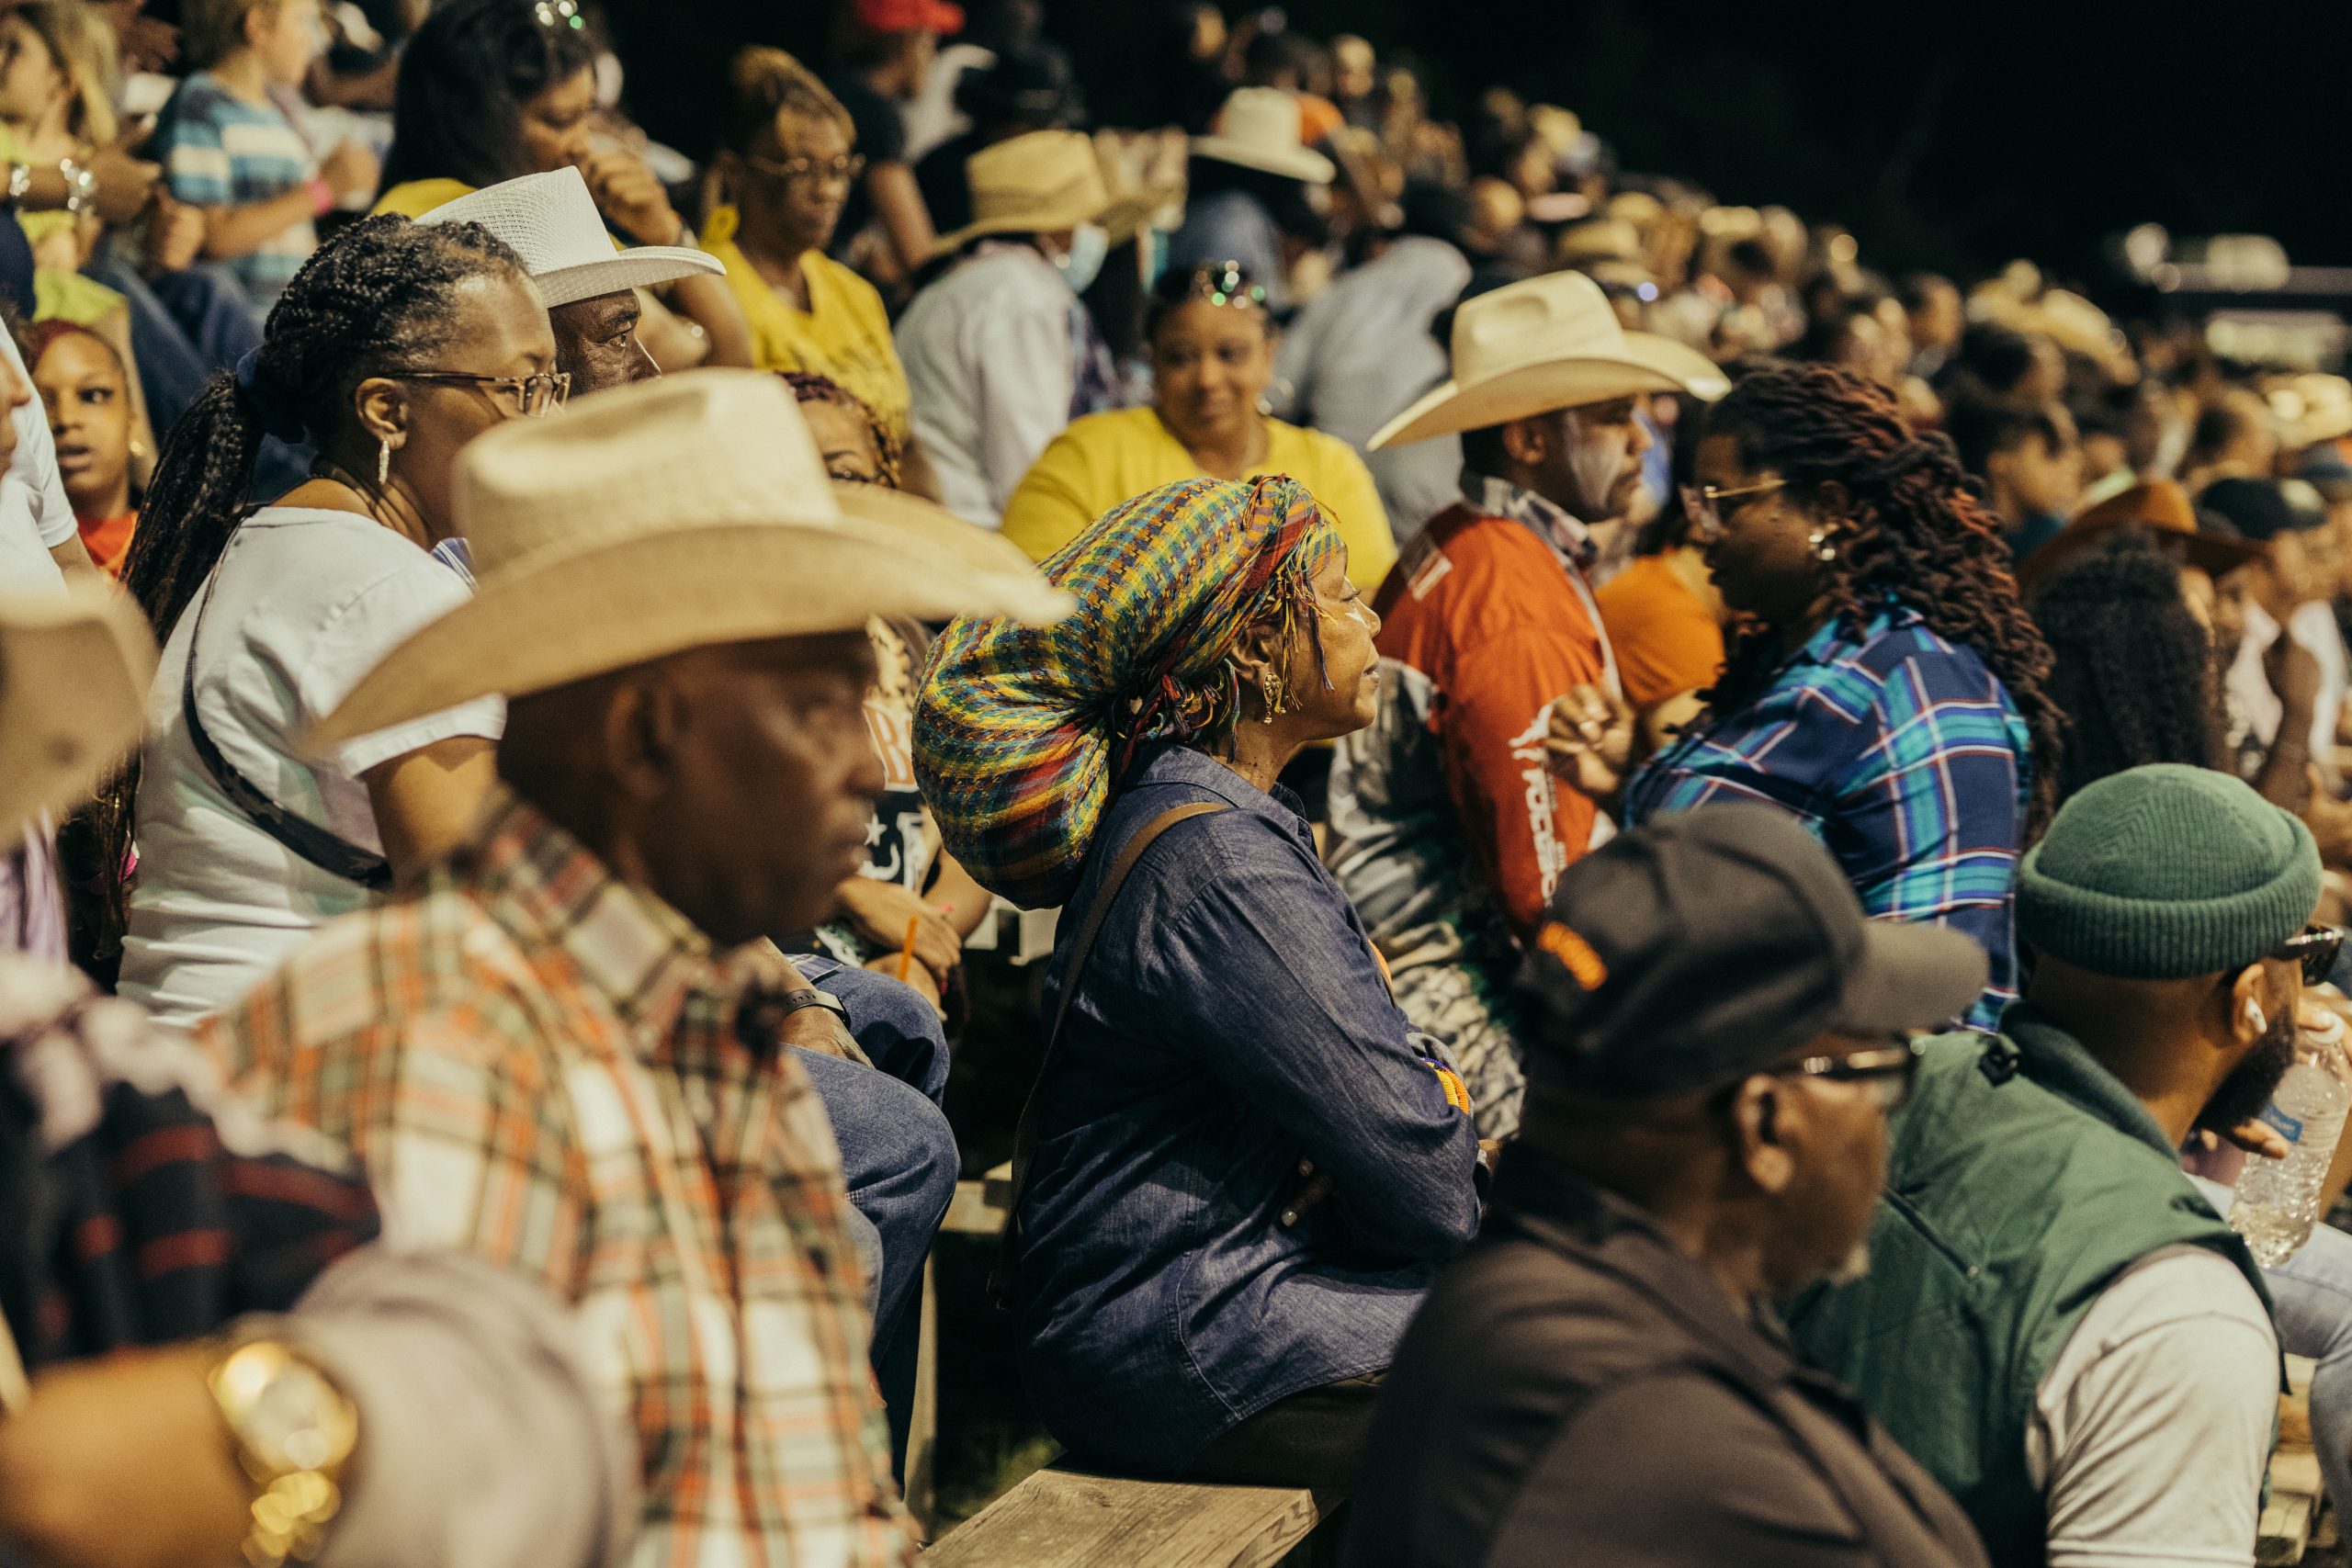 Attendees, some wearing cowboy hats, sit in the stands watching the rodeo.